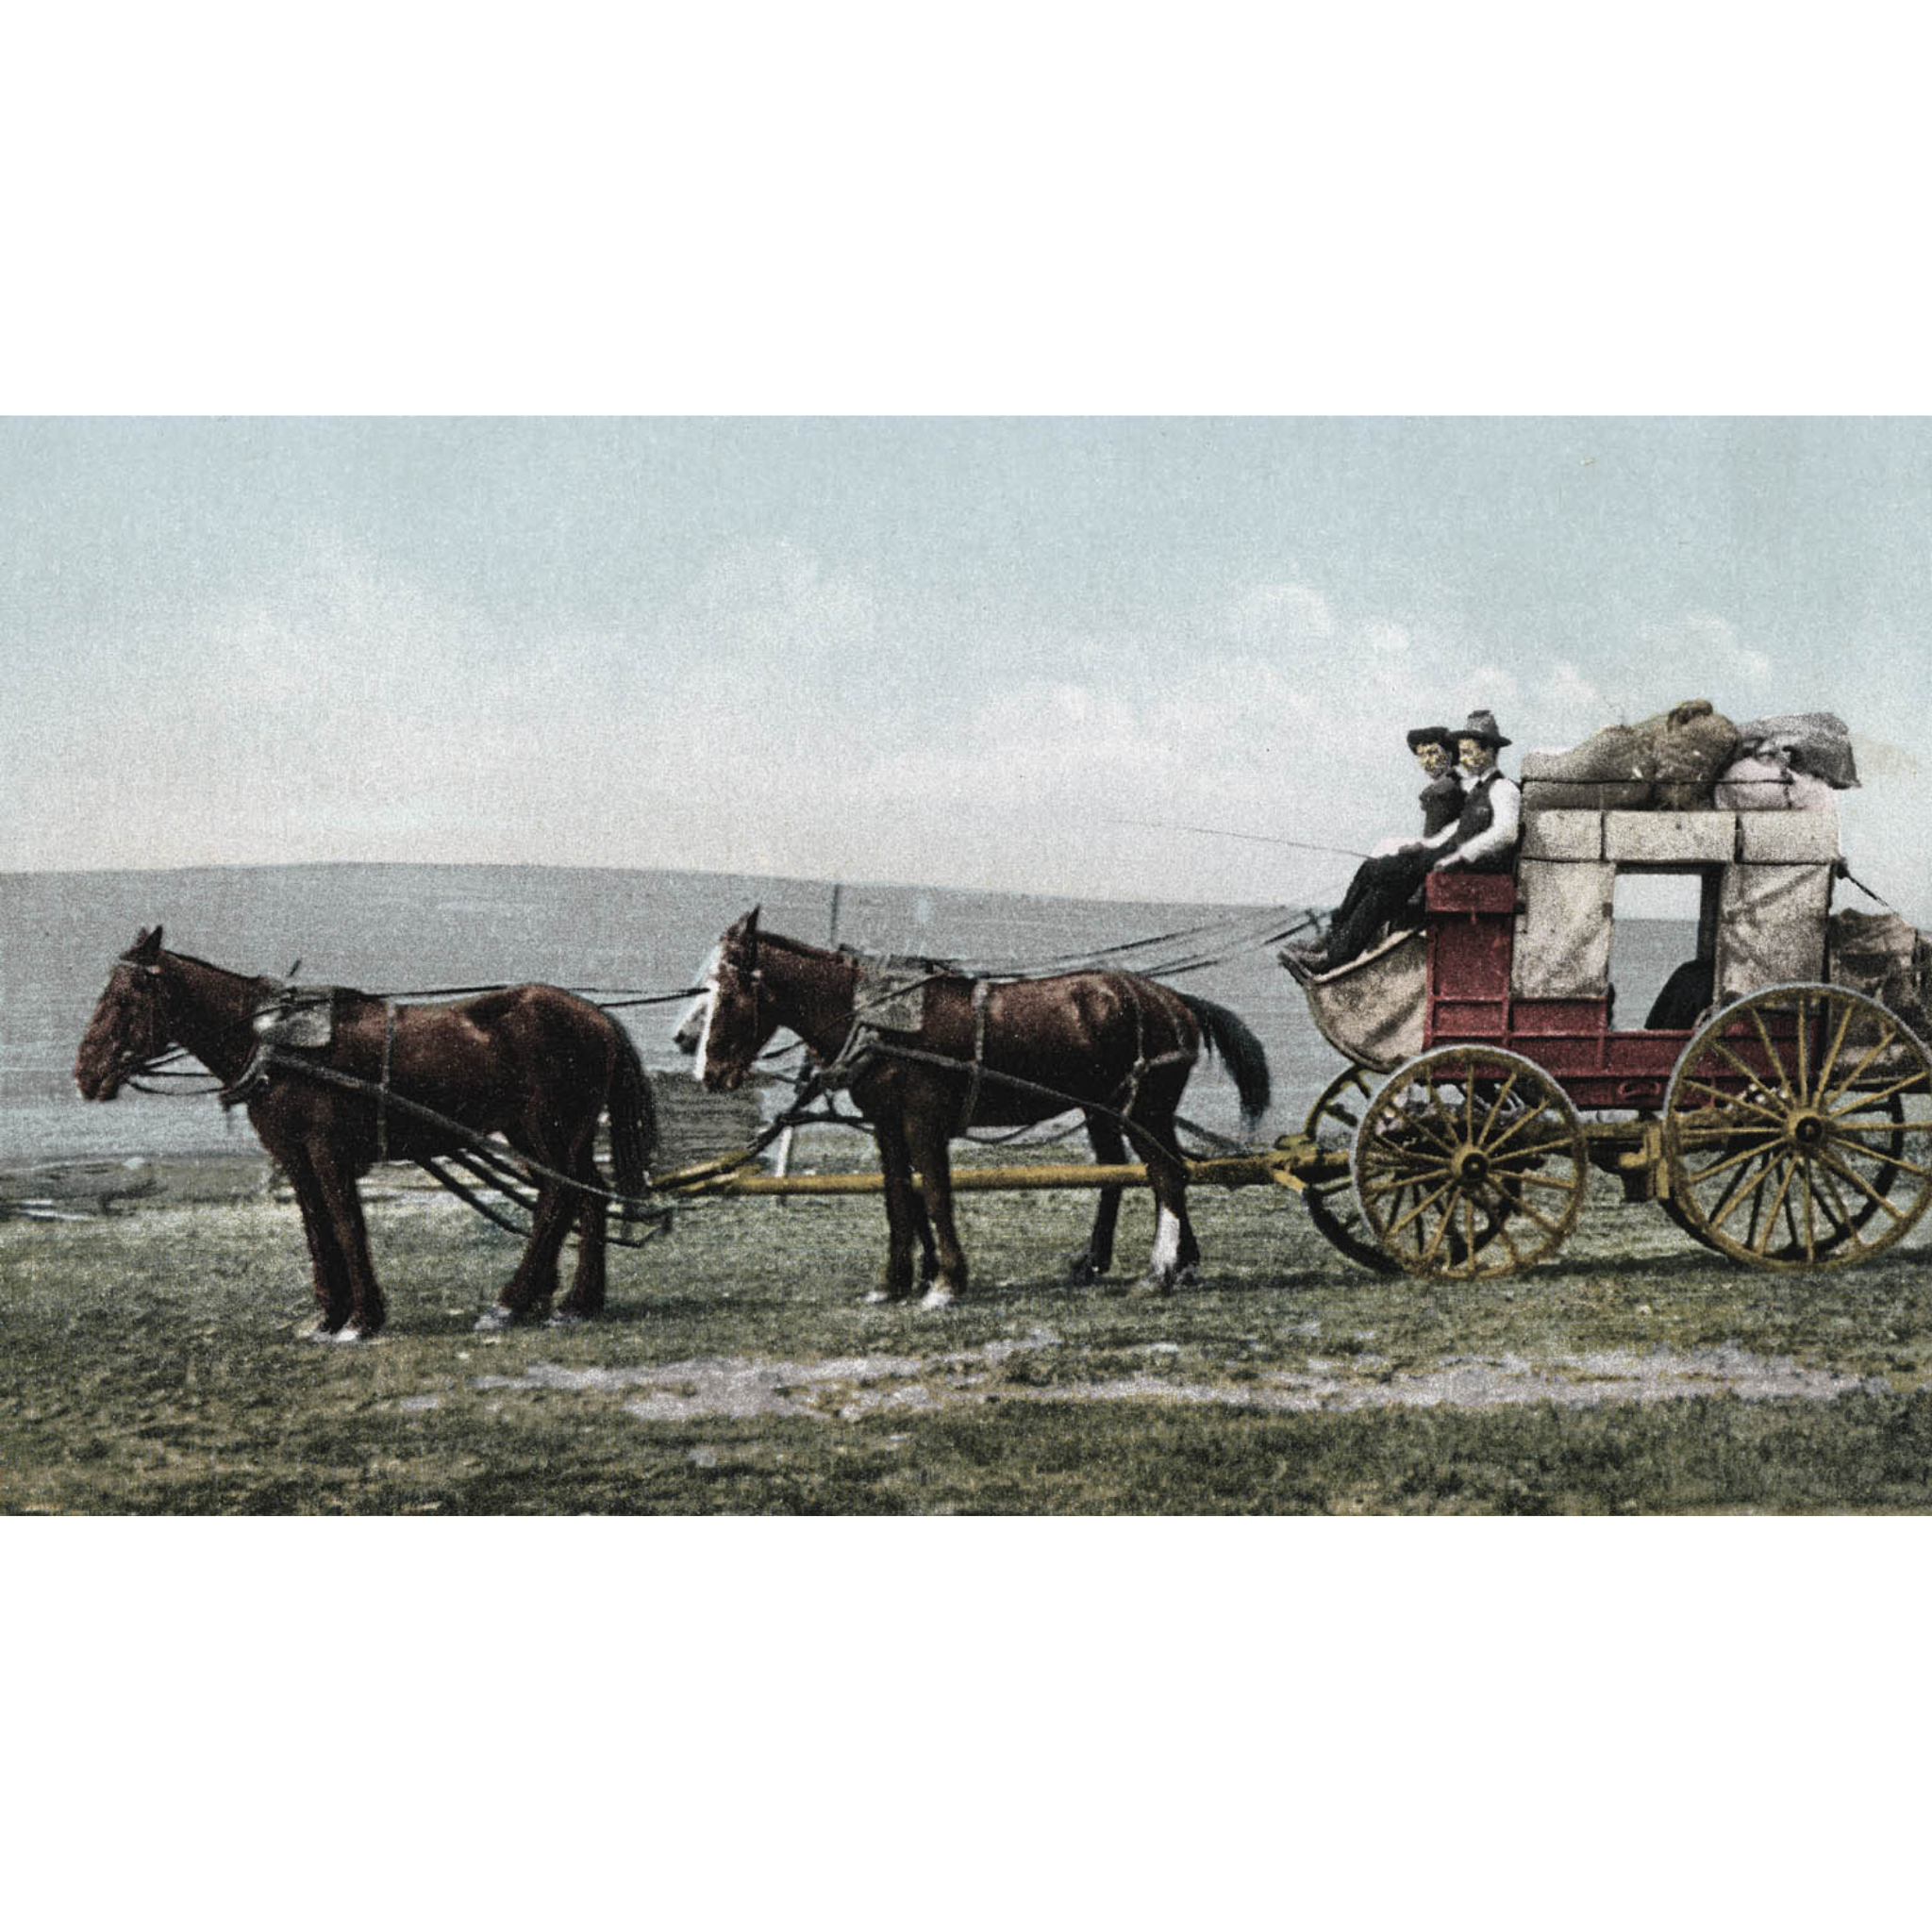 Western Stagecoach on the Plains - ca. 1910 Chromolithograph